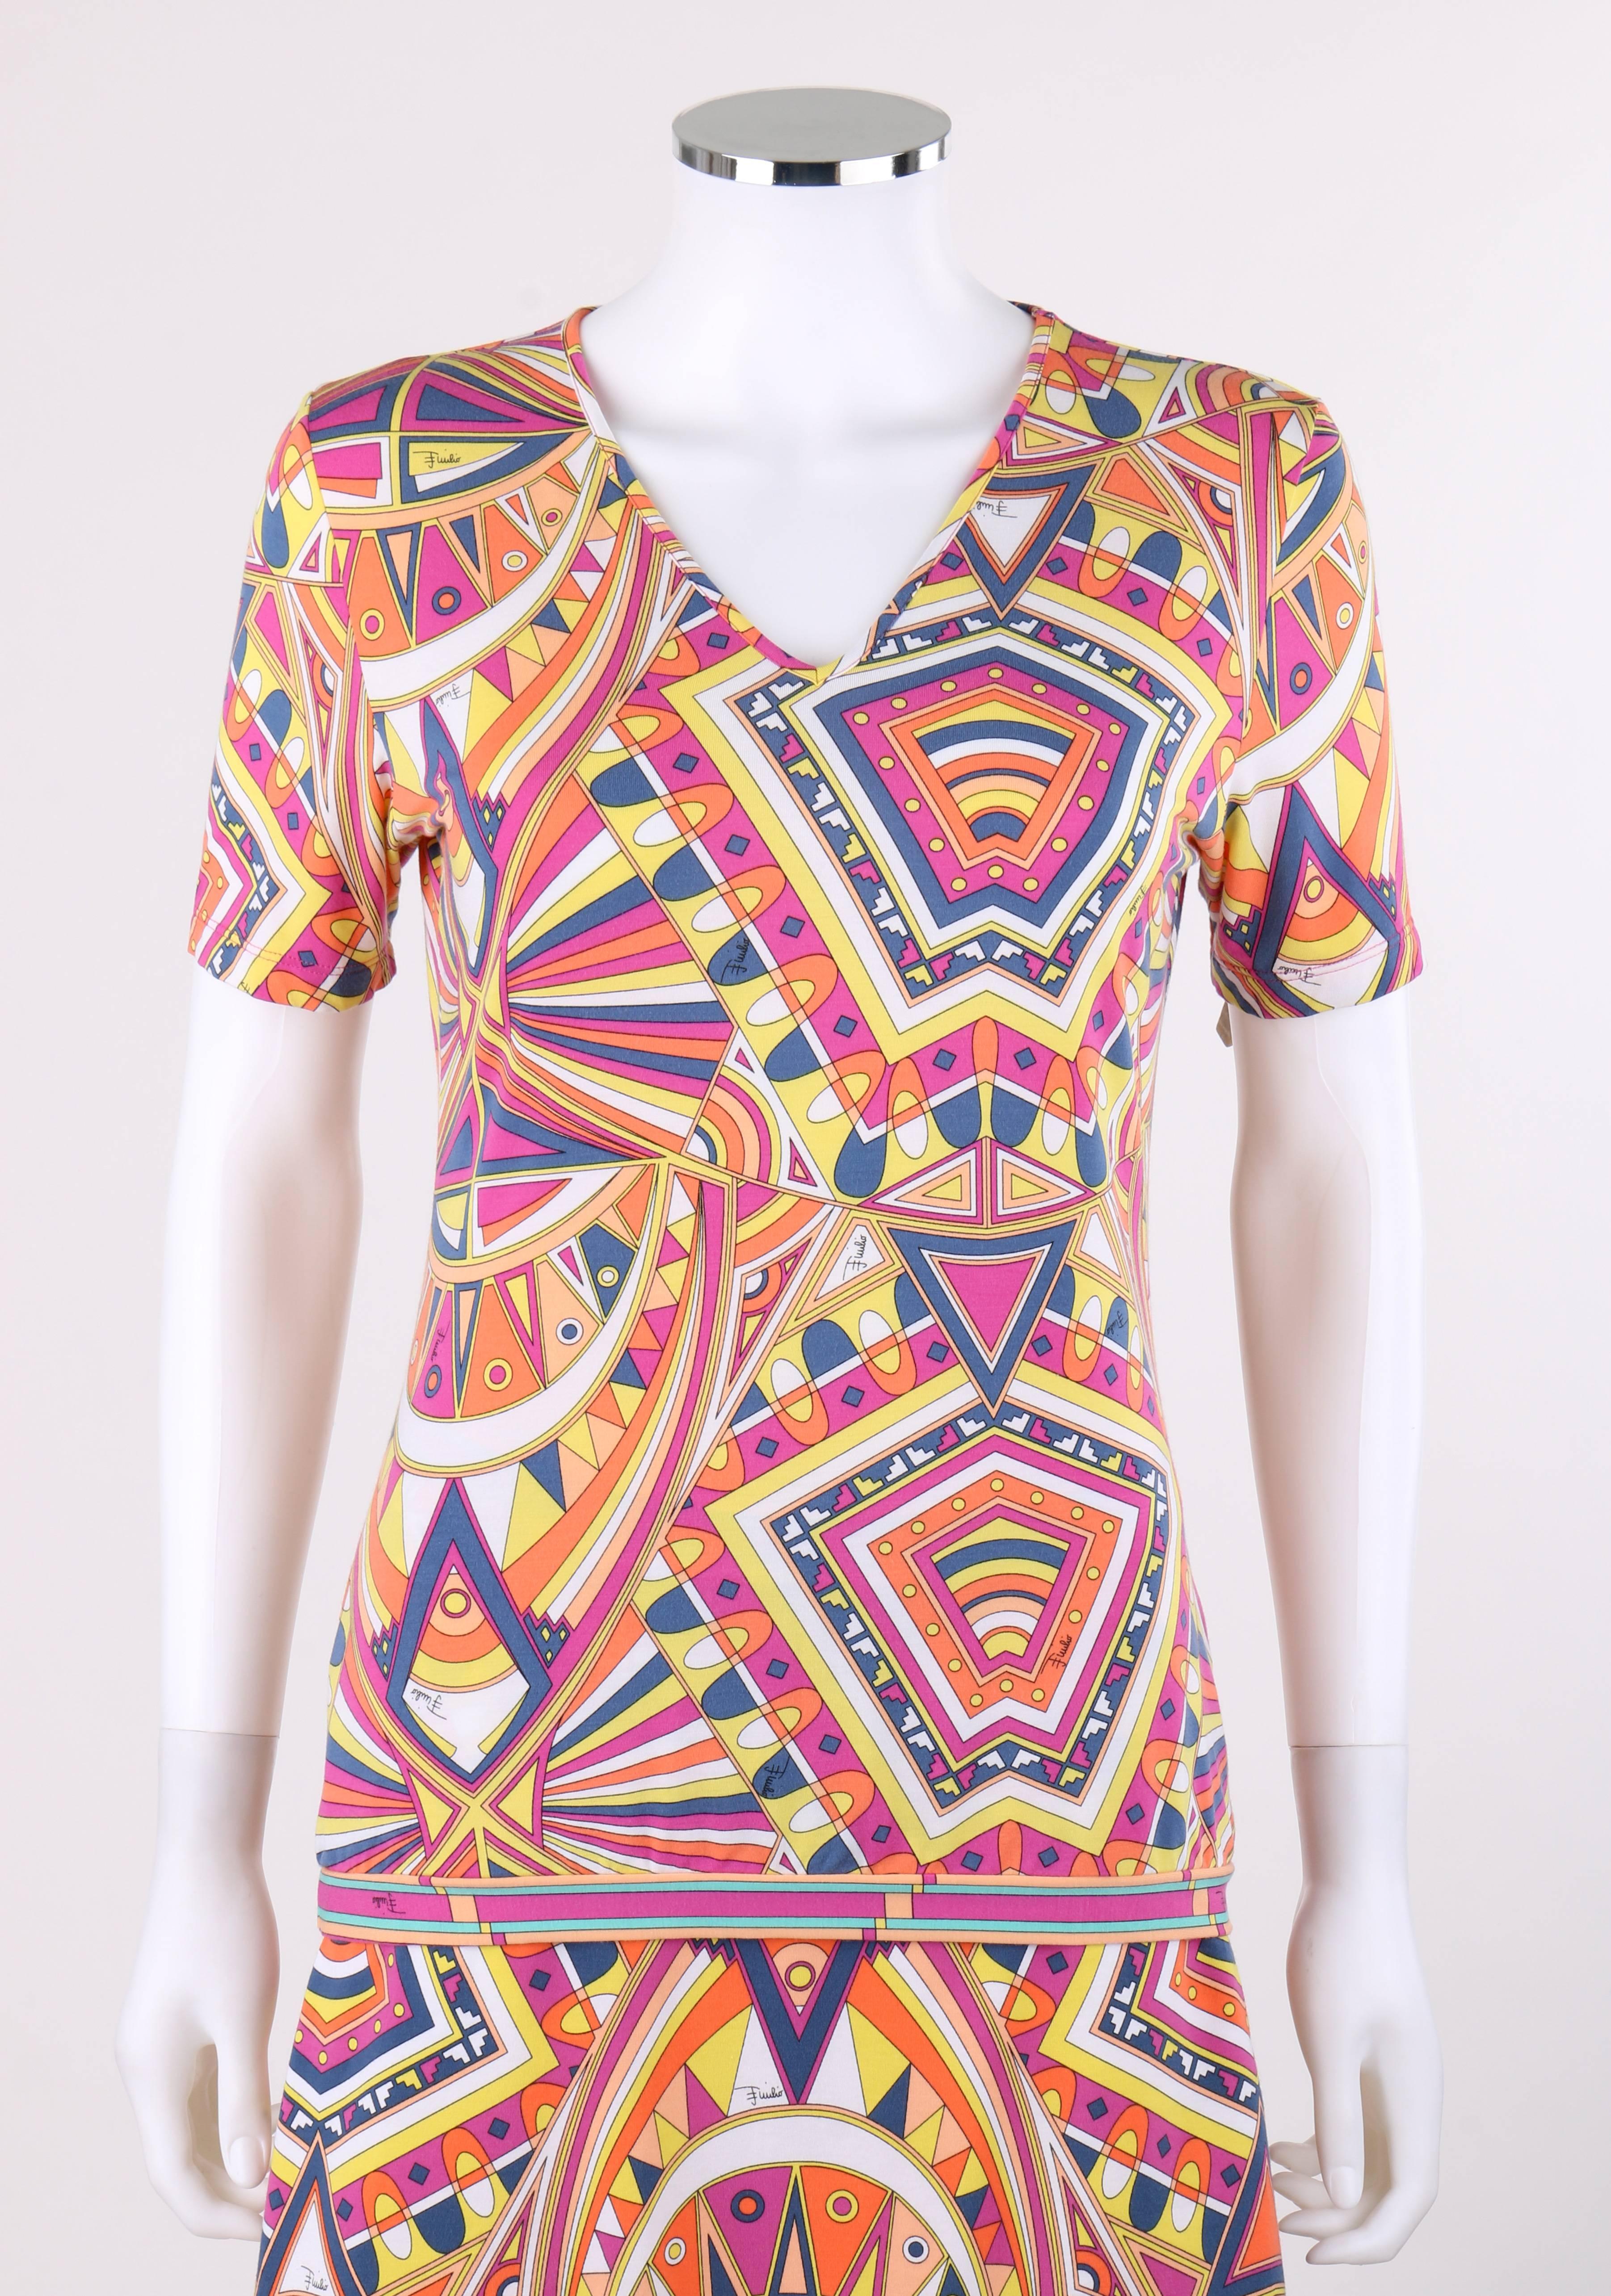 Emilio Pucci Spring / Summer 2009 two piece kaleidoscope signature print jersey knit v-neck top mini skirt set. Designed by Matthew Williamson. Bright multicolor kaleidoscope tribal signature print jersey knit in shades of orange, yellow, peach,